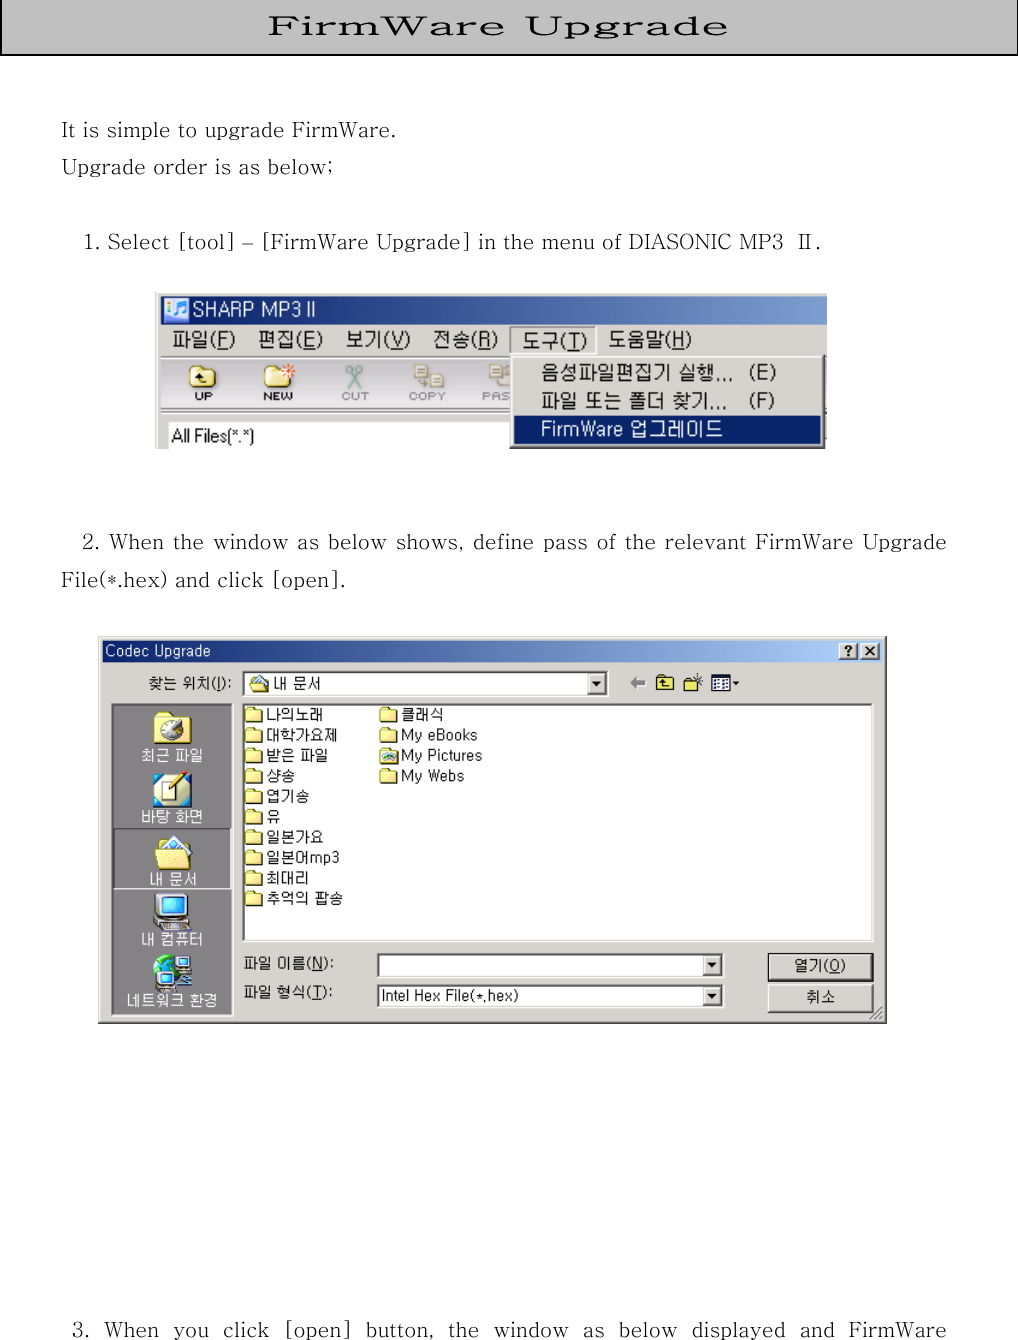    It is simple to upgrade FirmWare. Upgrade order is as below;      1. Select [tool] – [FirmWare Upgrade] in the menu of DIASONIC MP3  Ⅱ.        2. When the window as below shows, define pass of the relevant FirmWare Upgrade File(*.hex) and click [open].                      3.  When  you  click  [open]  button,  the  window  as  below  displayed and FirmWare FirmWare Upgrade  